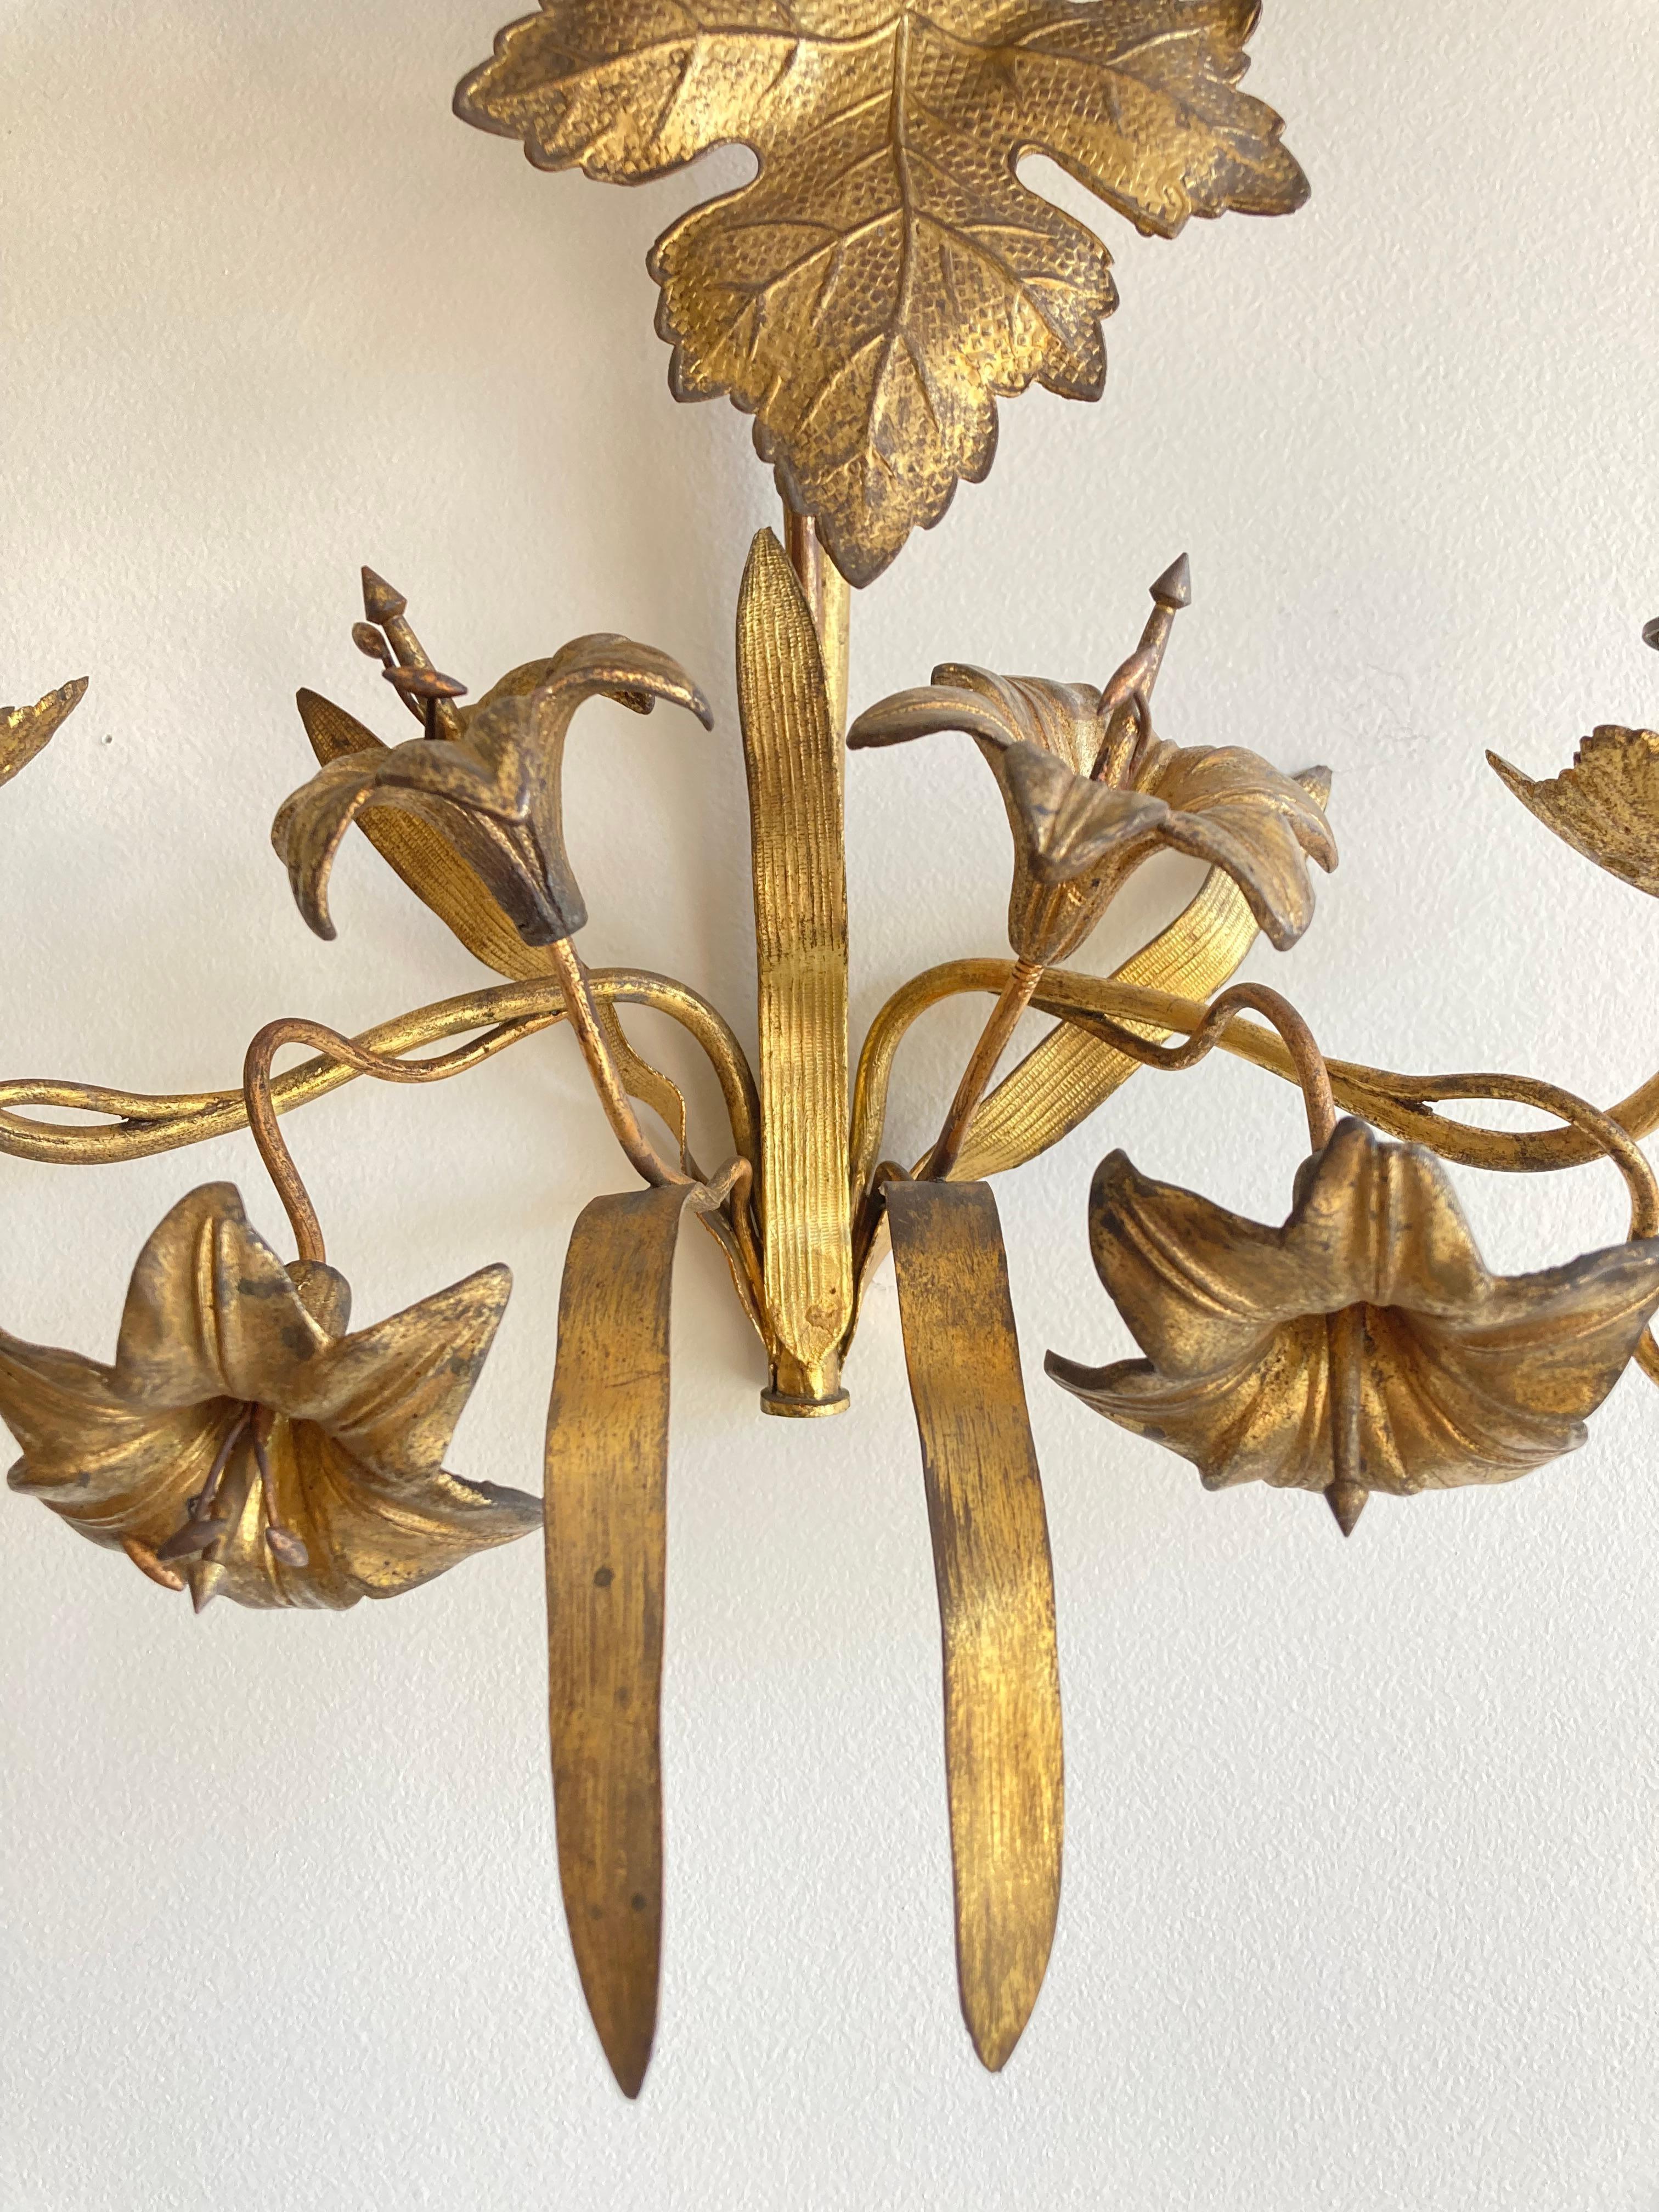 Napoleon III Large Antique 19th Century French Floral Church Wall Sconce in Brass for Candles For Sale